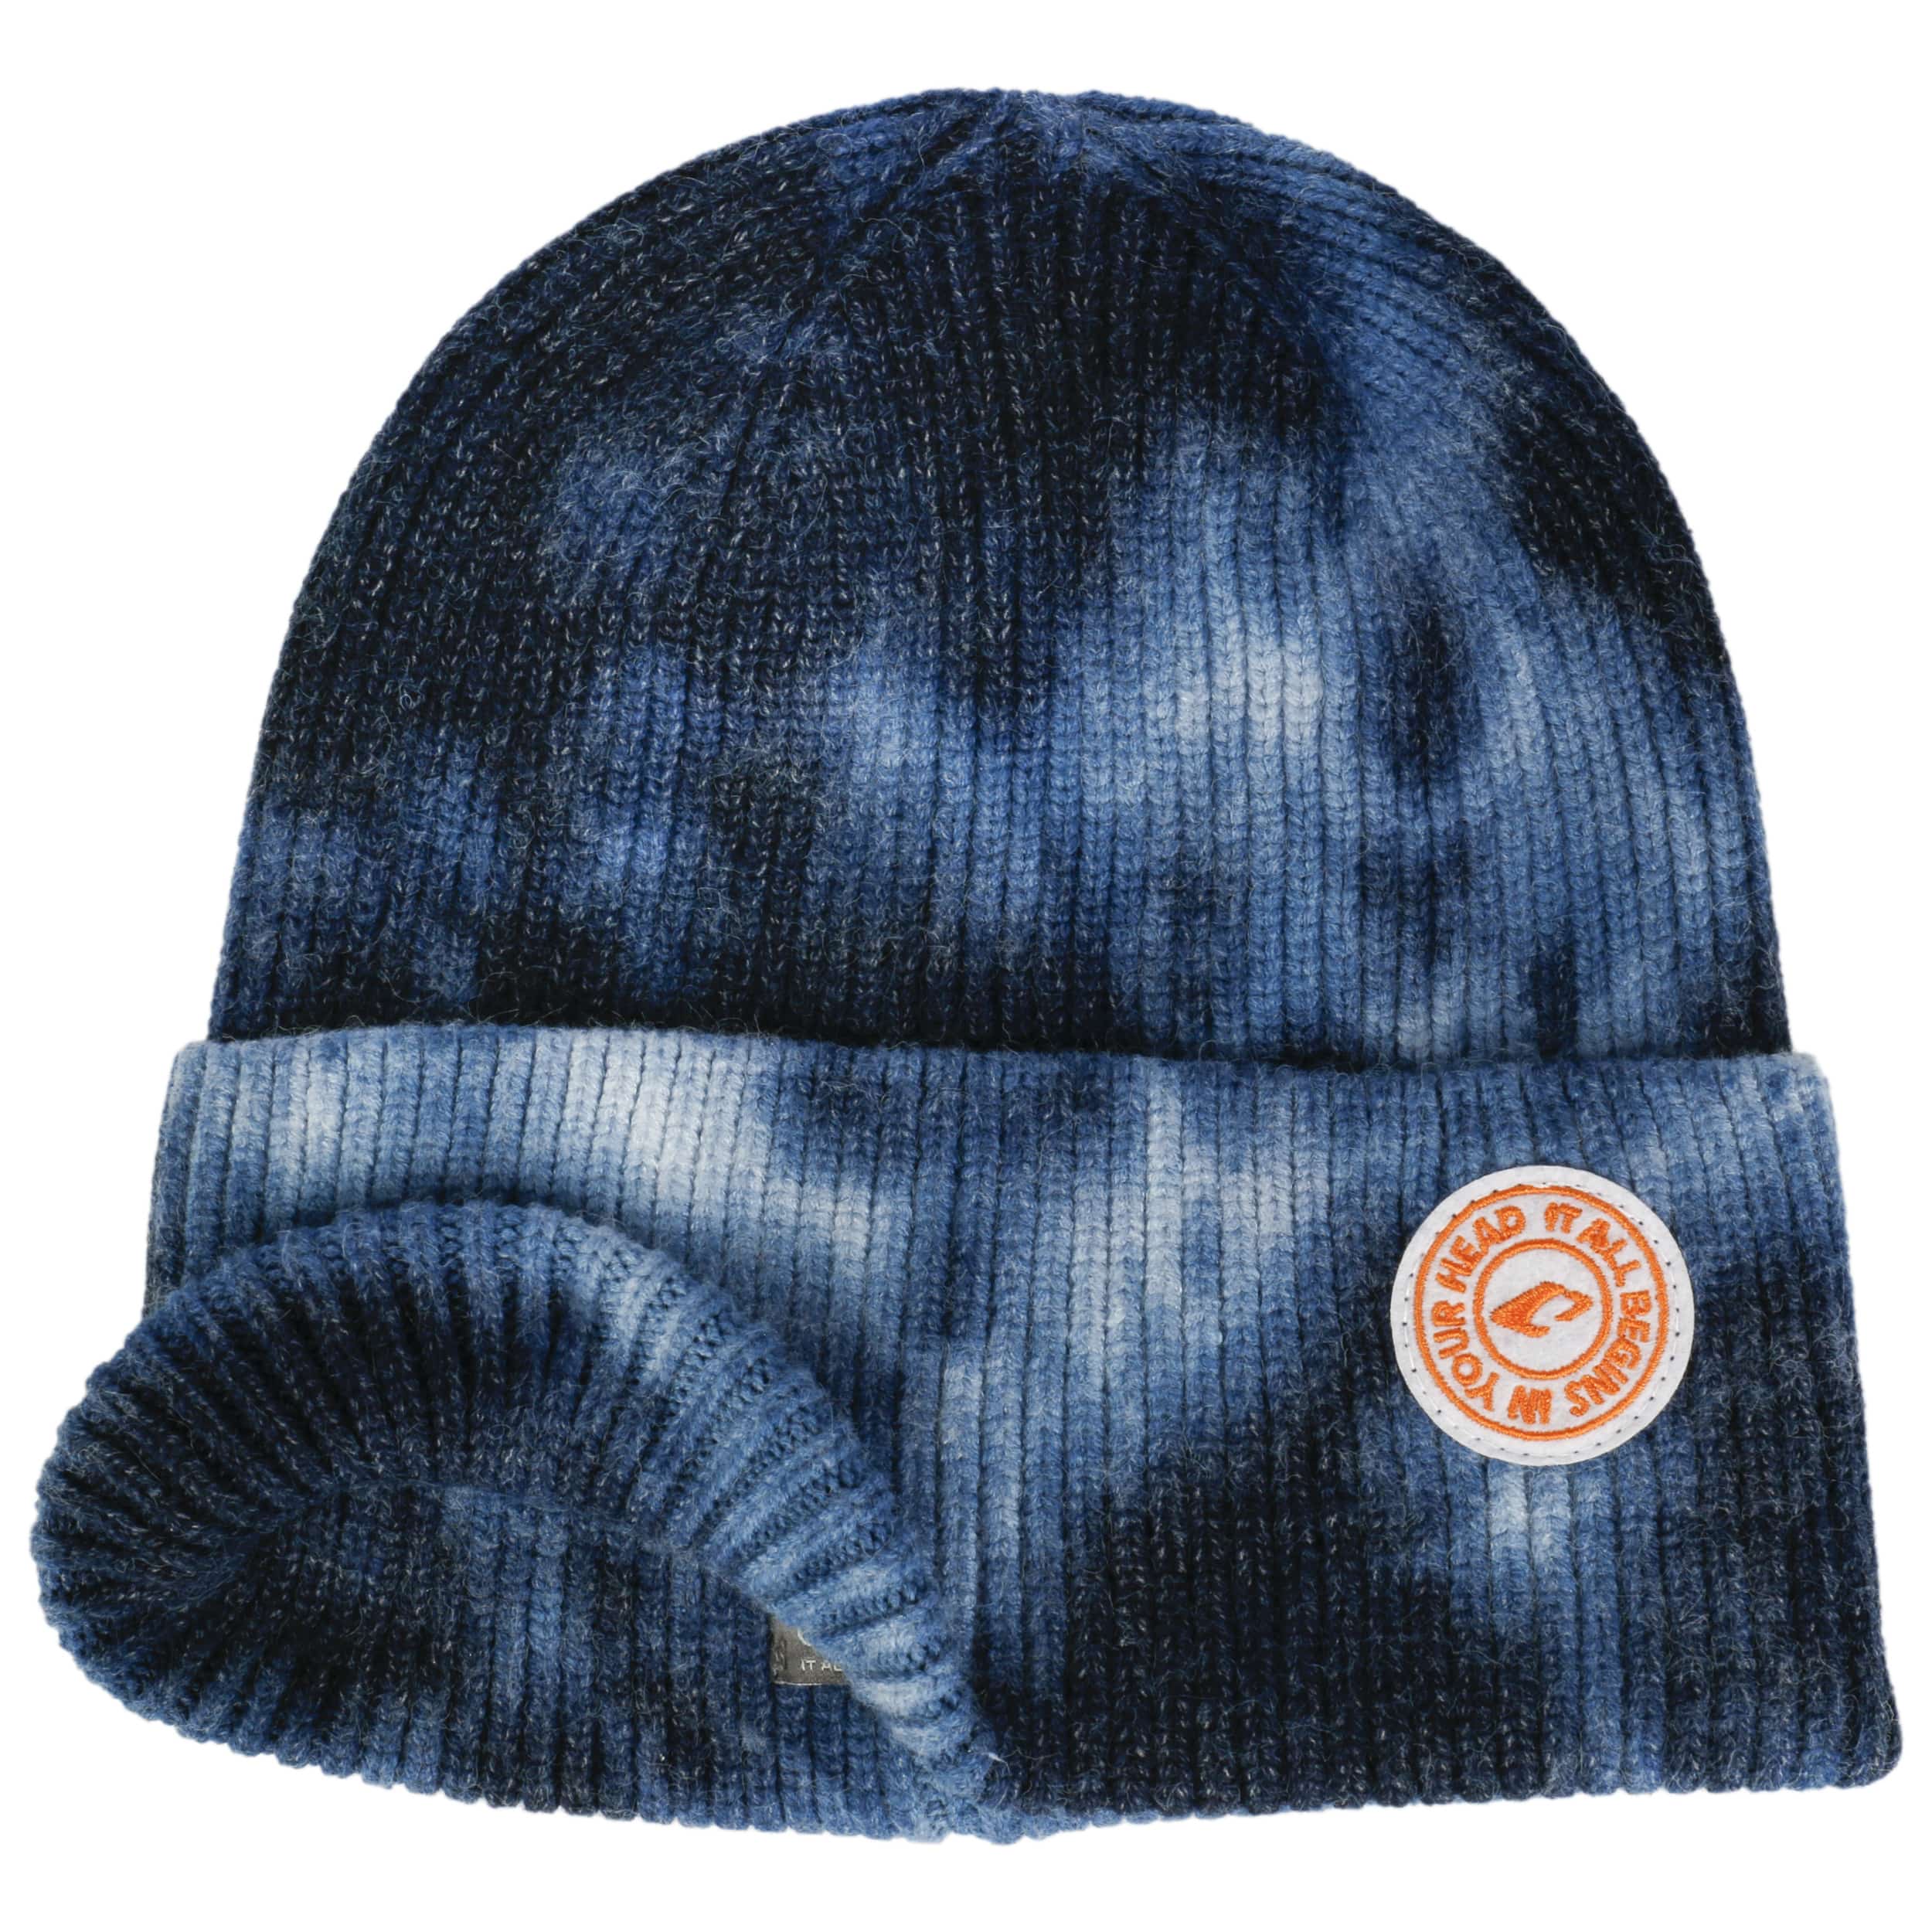 Yuna Tie Dye Beanie Hat by Chillouts - 28,95 €